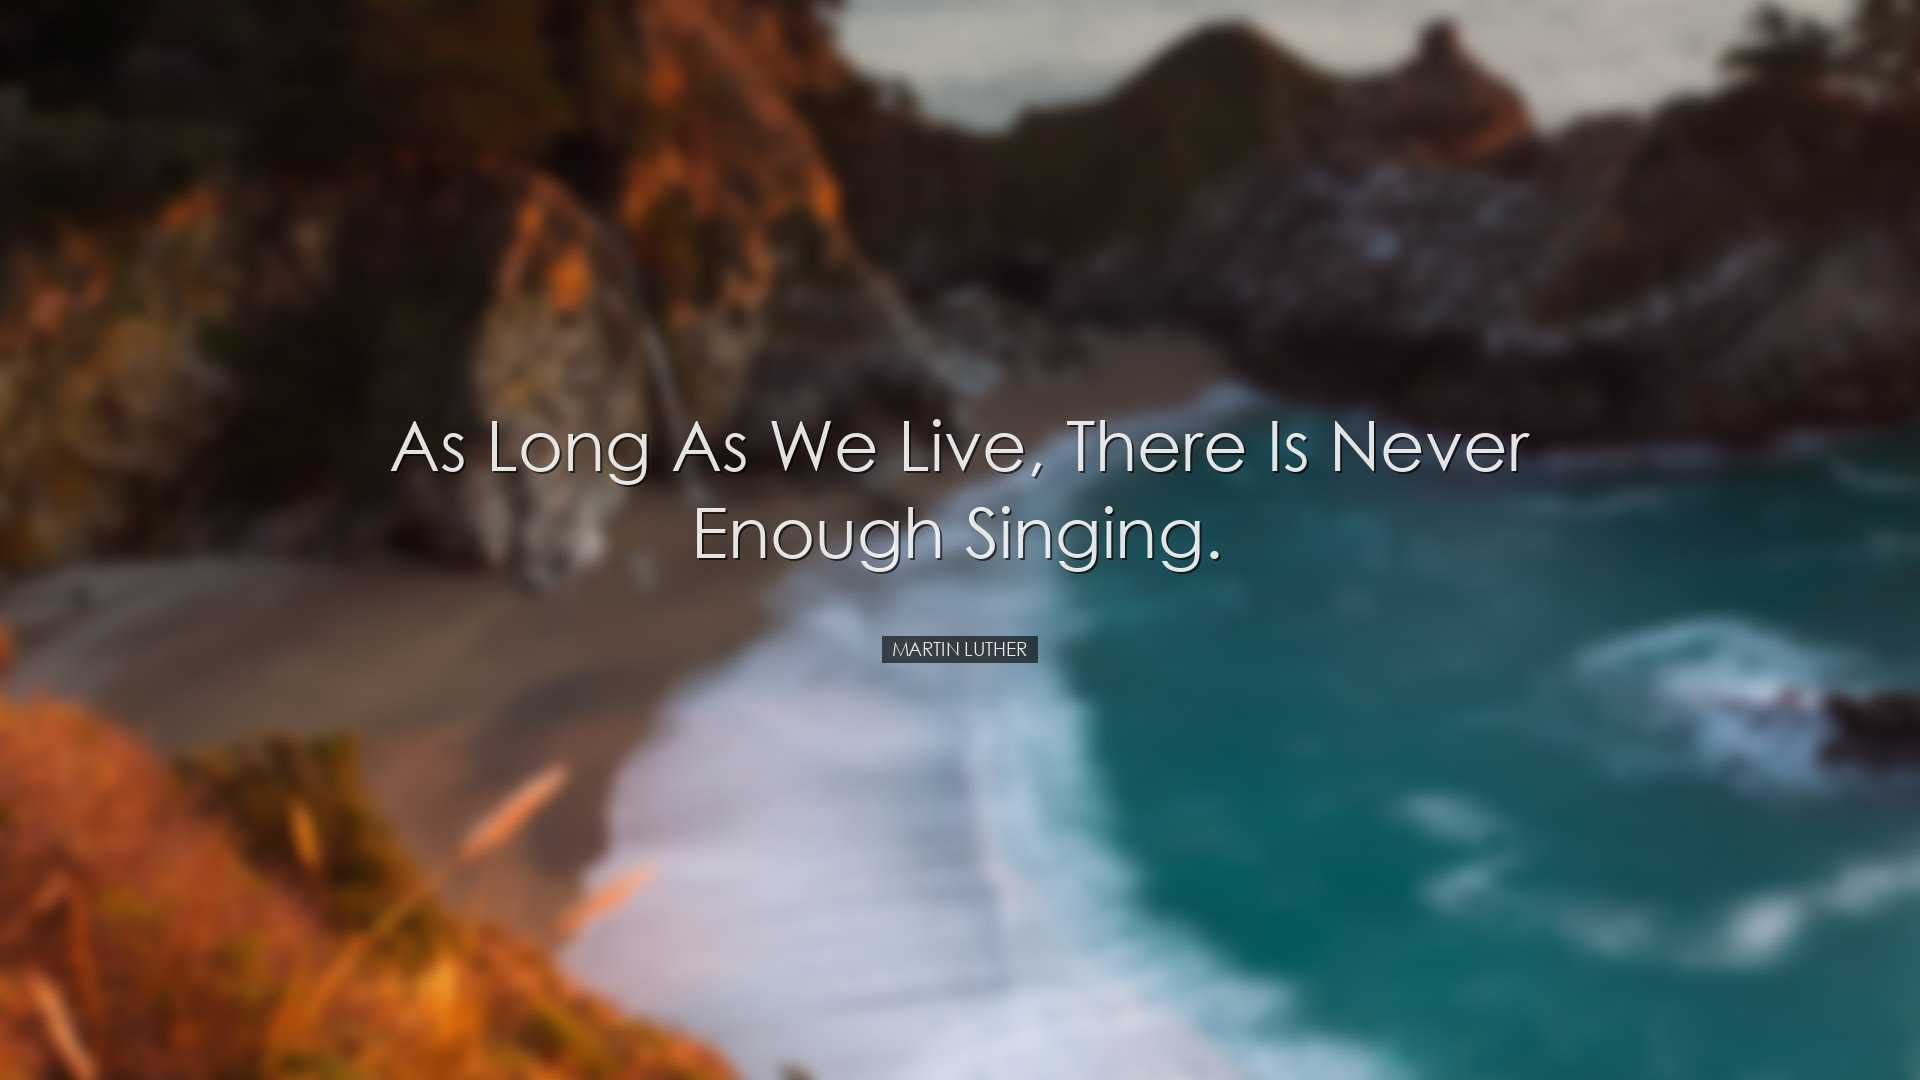 As long as we live, there is never enough singing. - Martin Luther